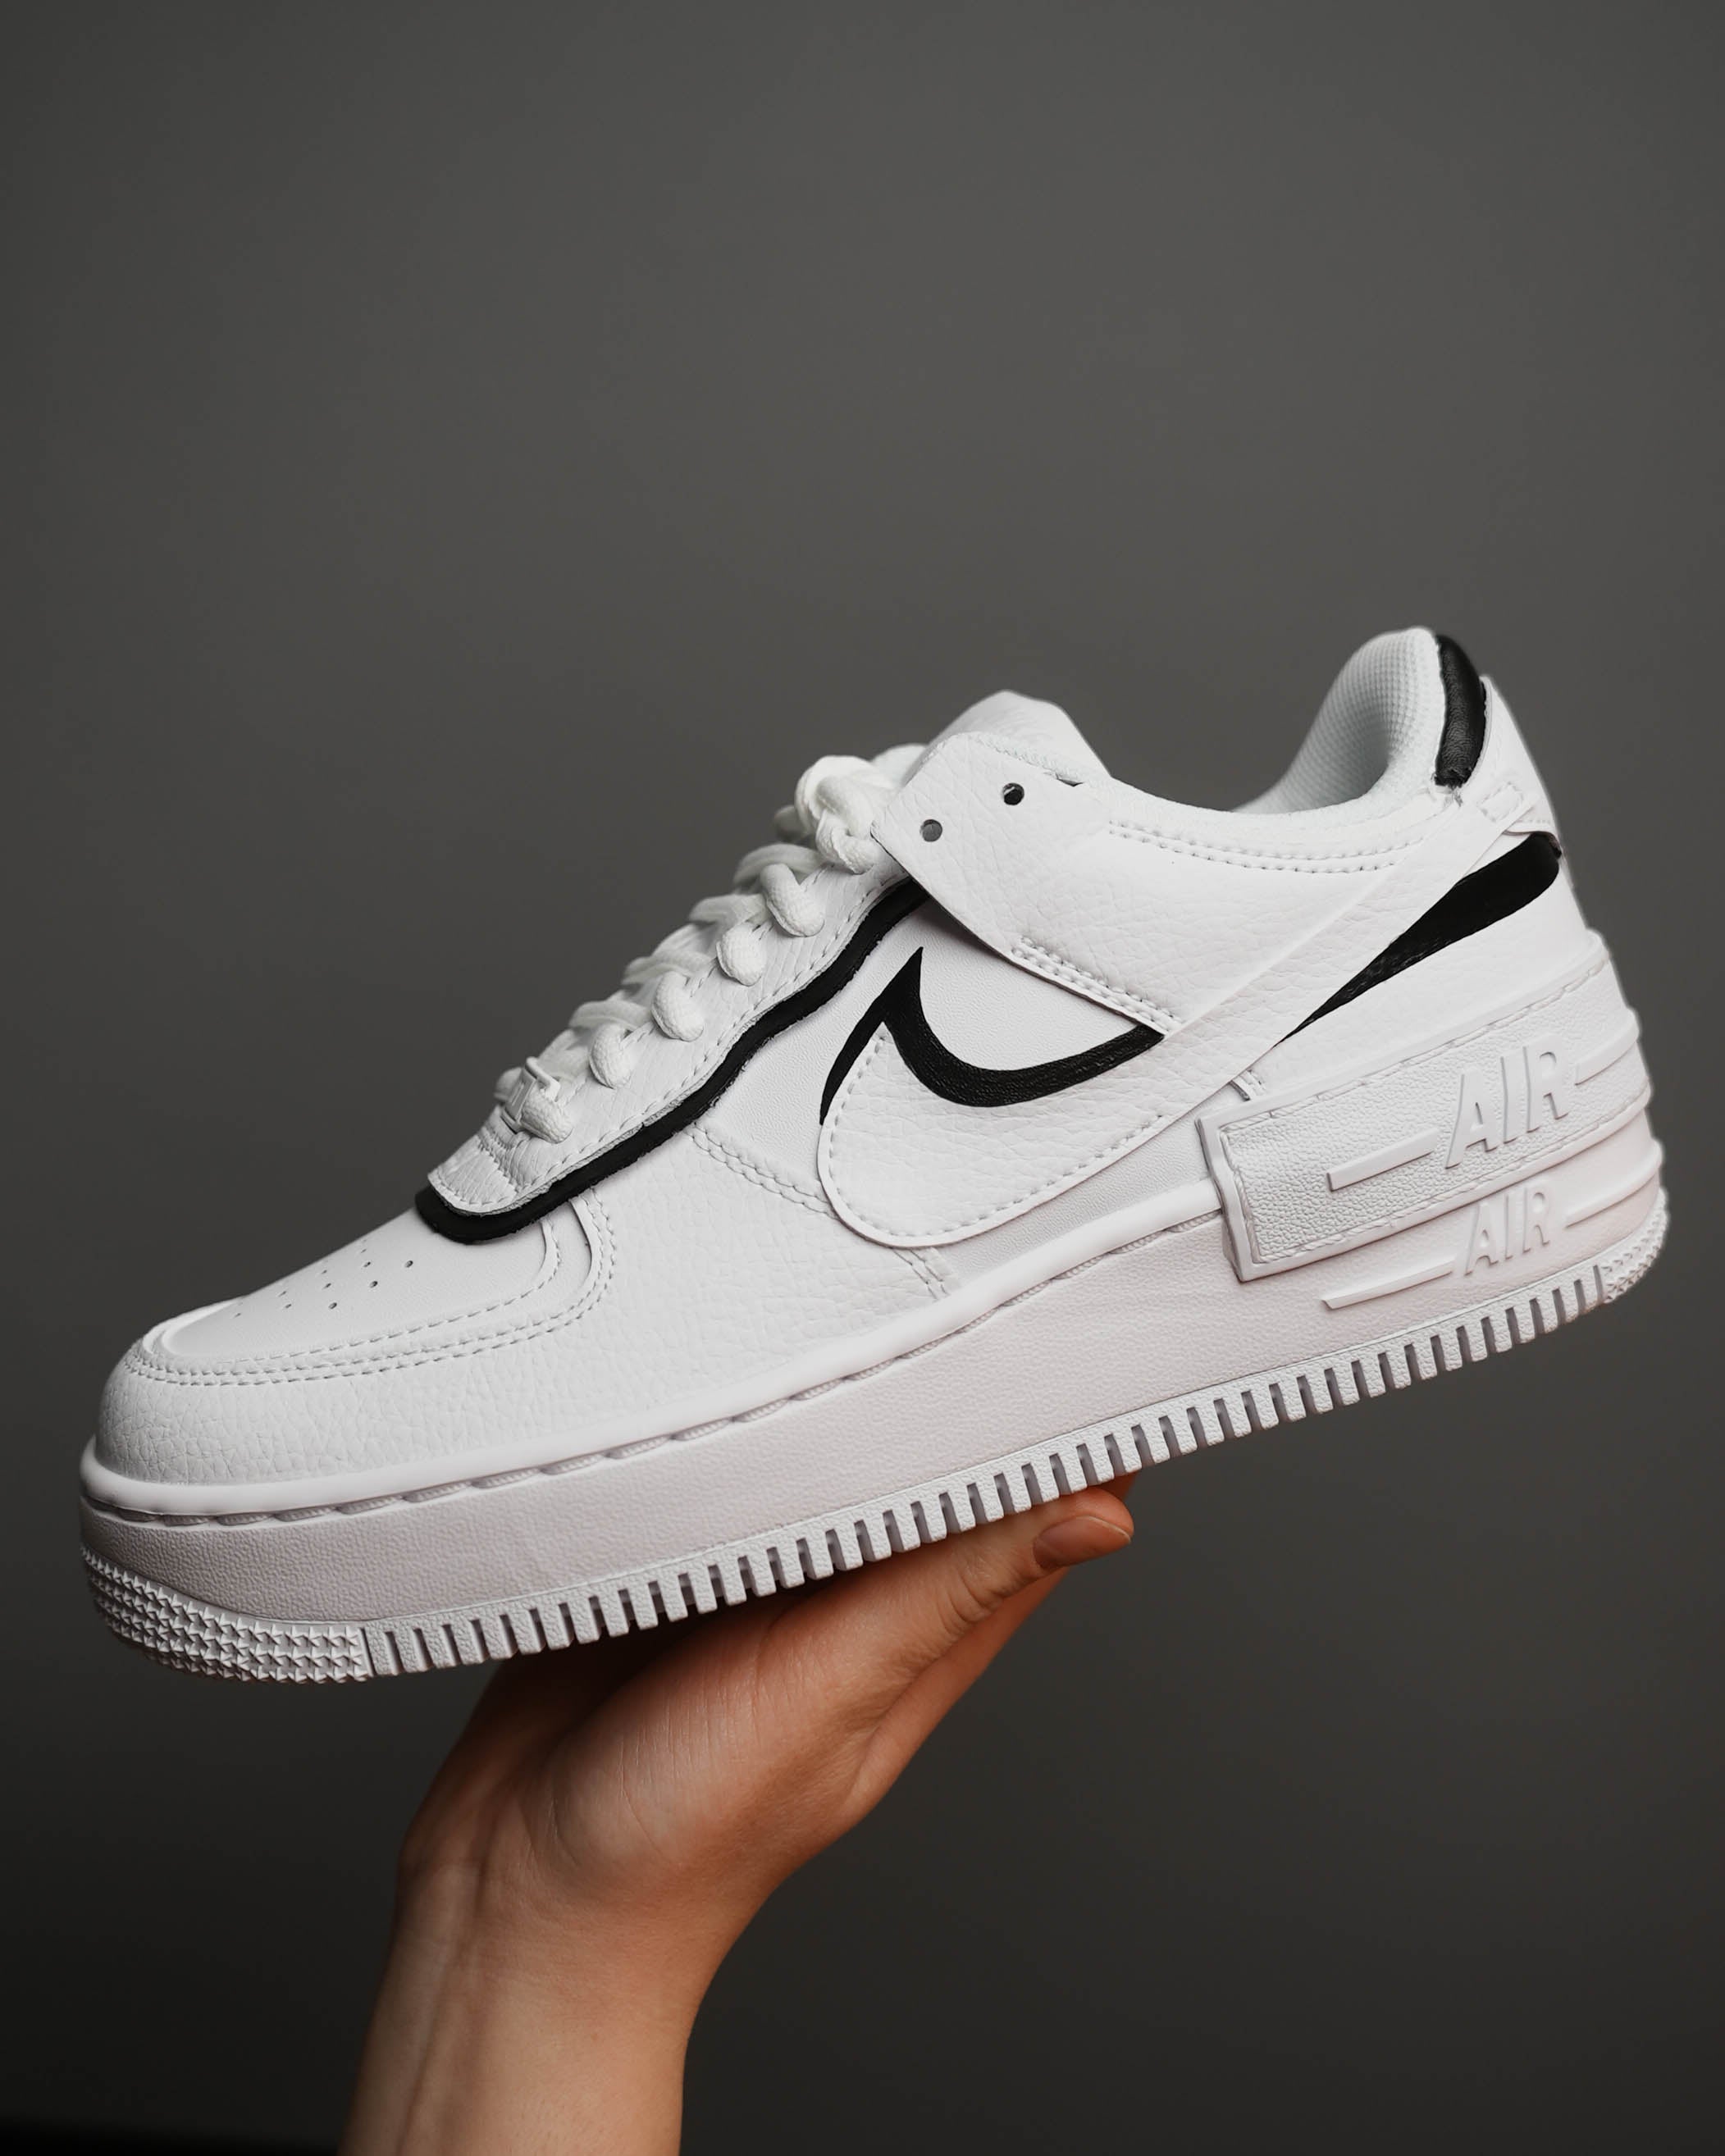 shadow air force 1 black and white